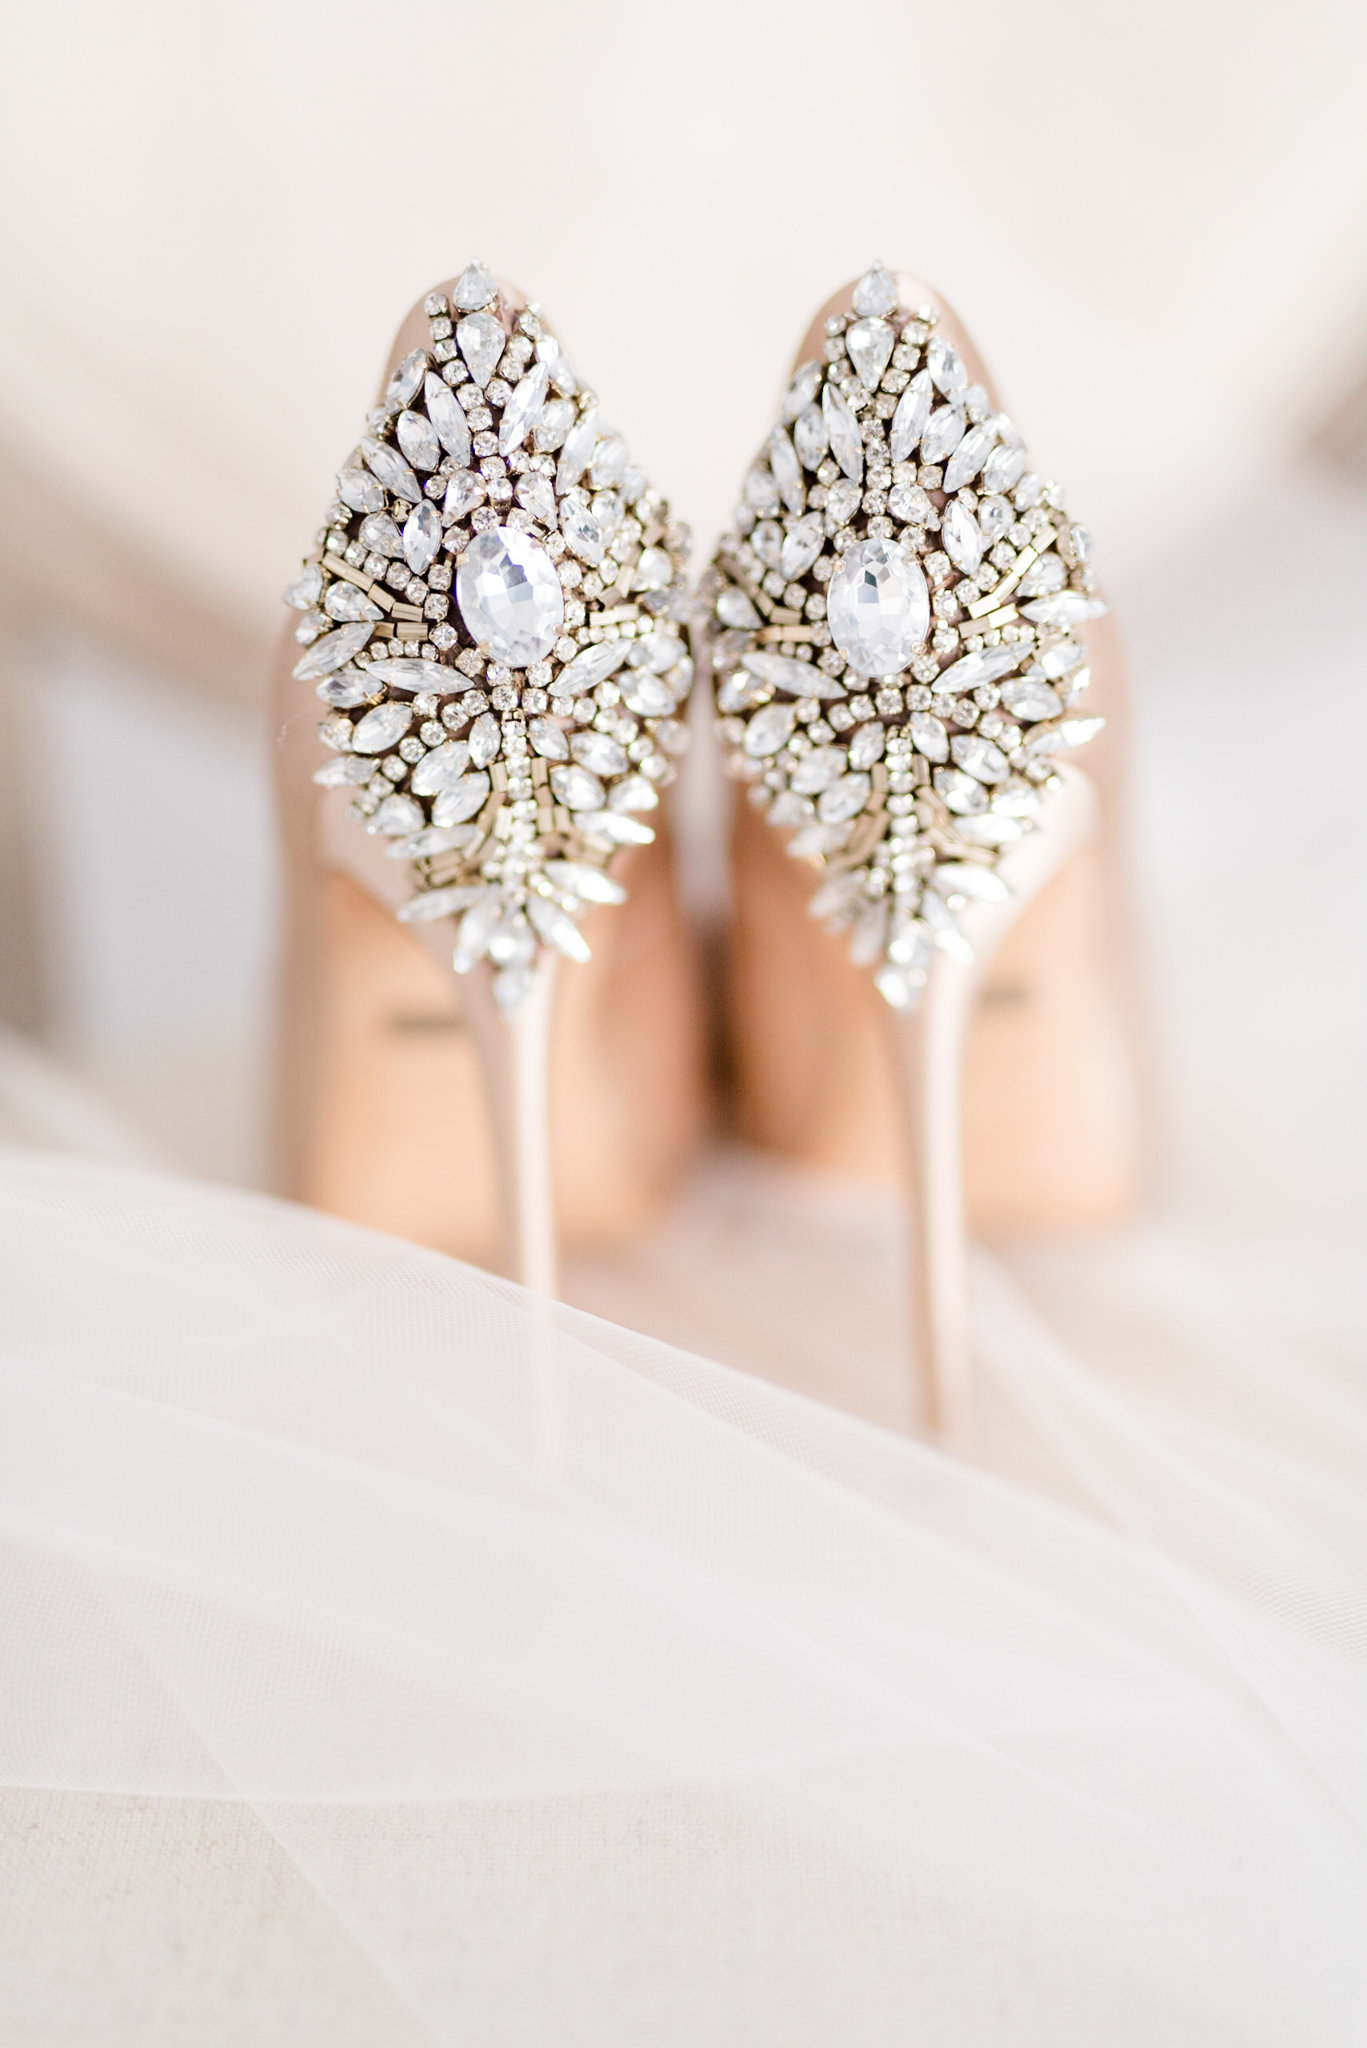 Jeweled bridal shoes sit on chair in Tampa.